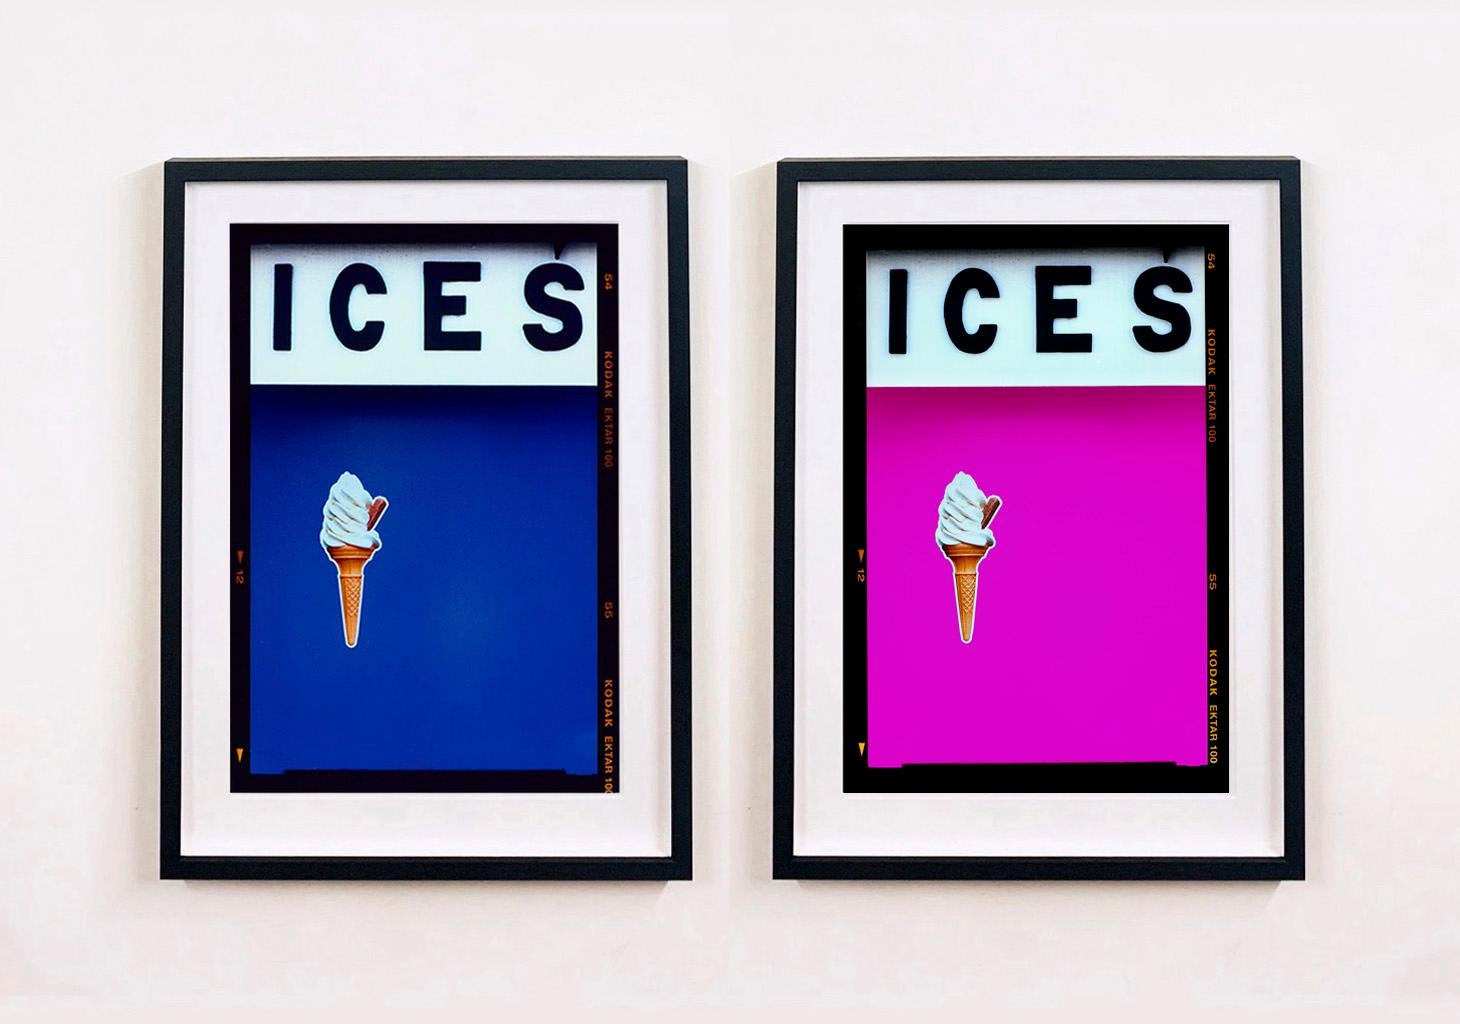 Ices (Pink), Bexhill-on-Sea - British seaside color photography 1